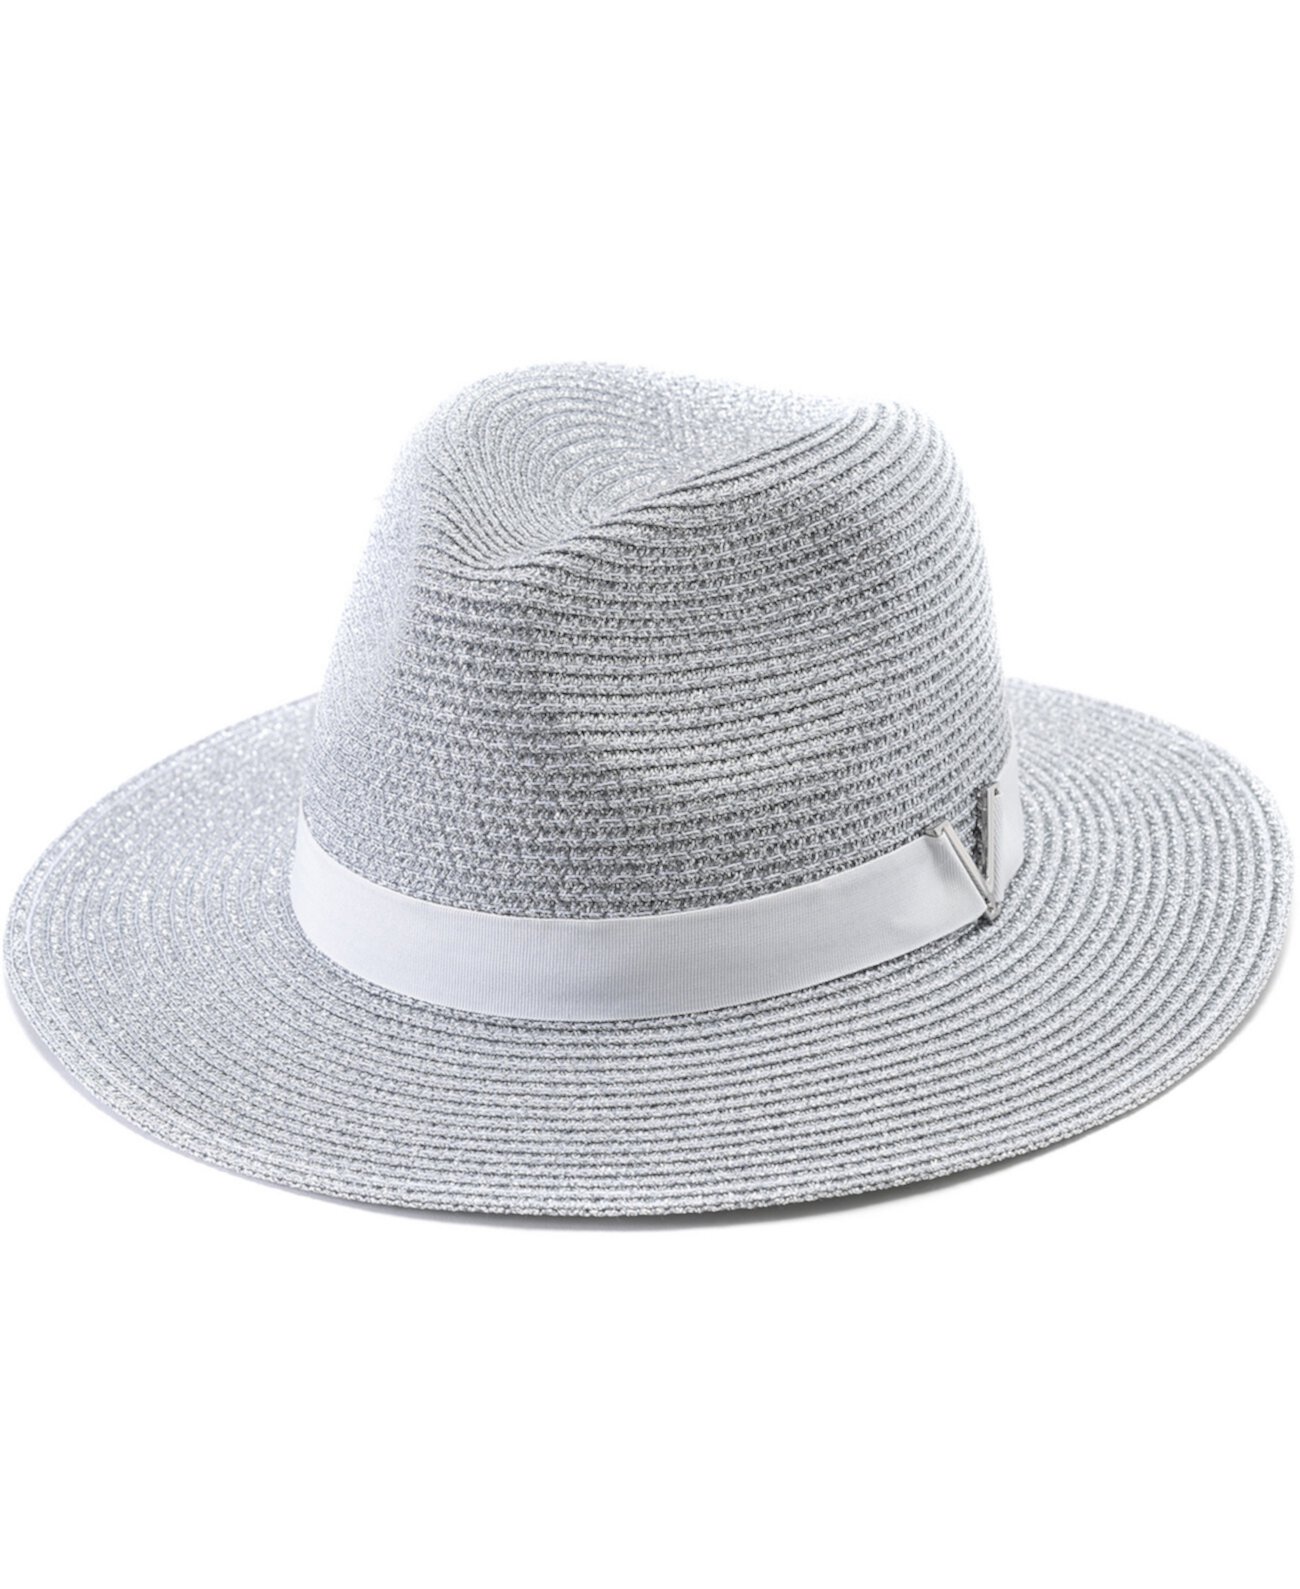 All Over Shine Panama Hat Vince Camuto